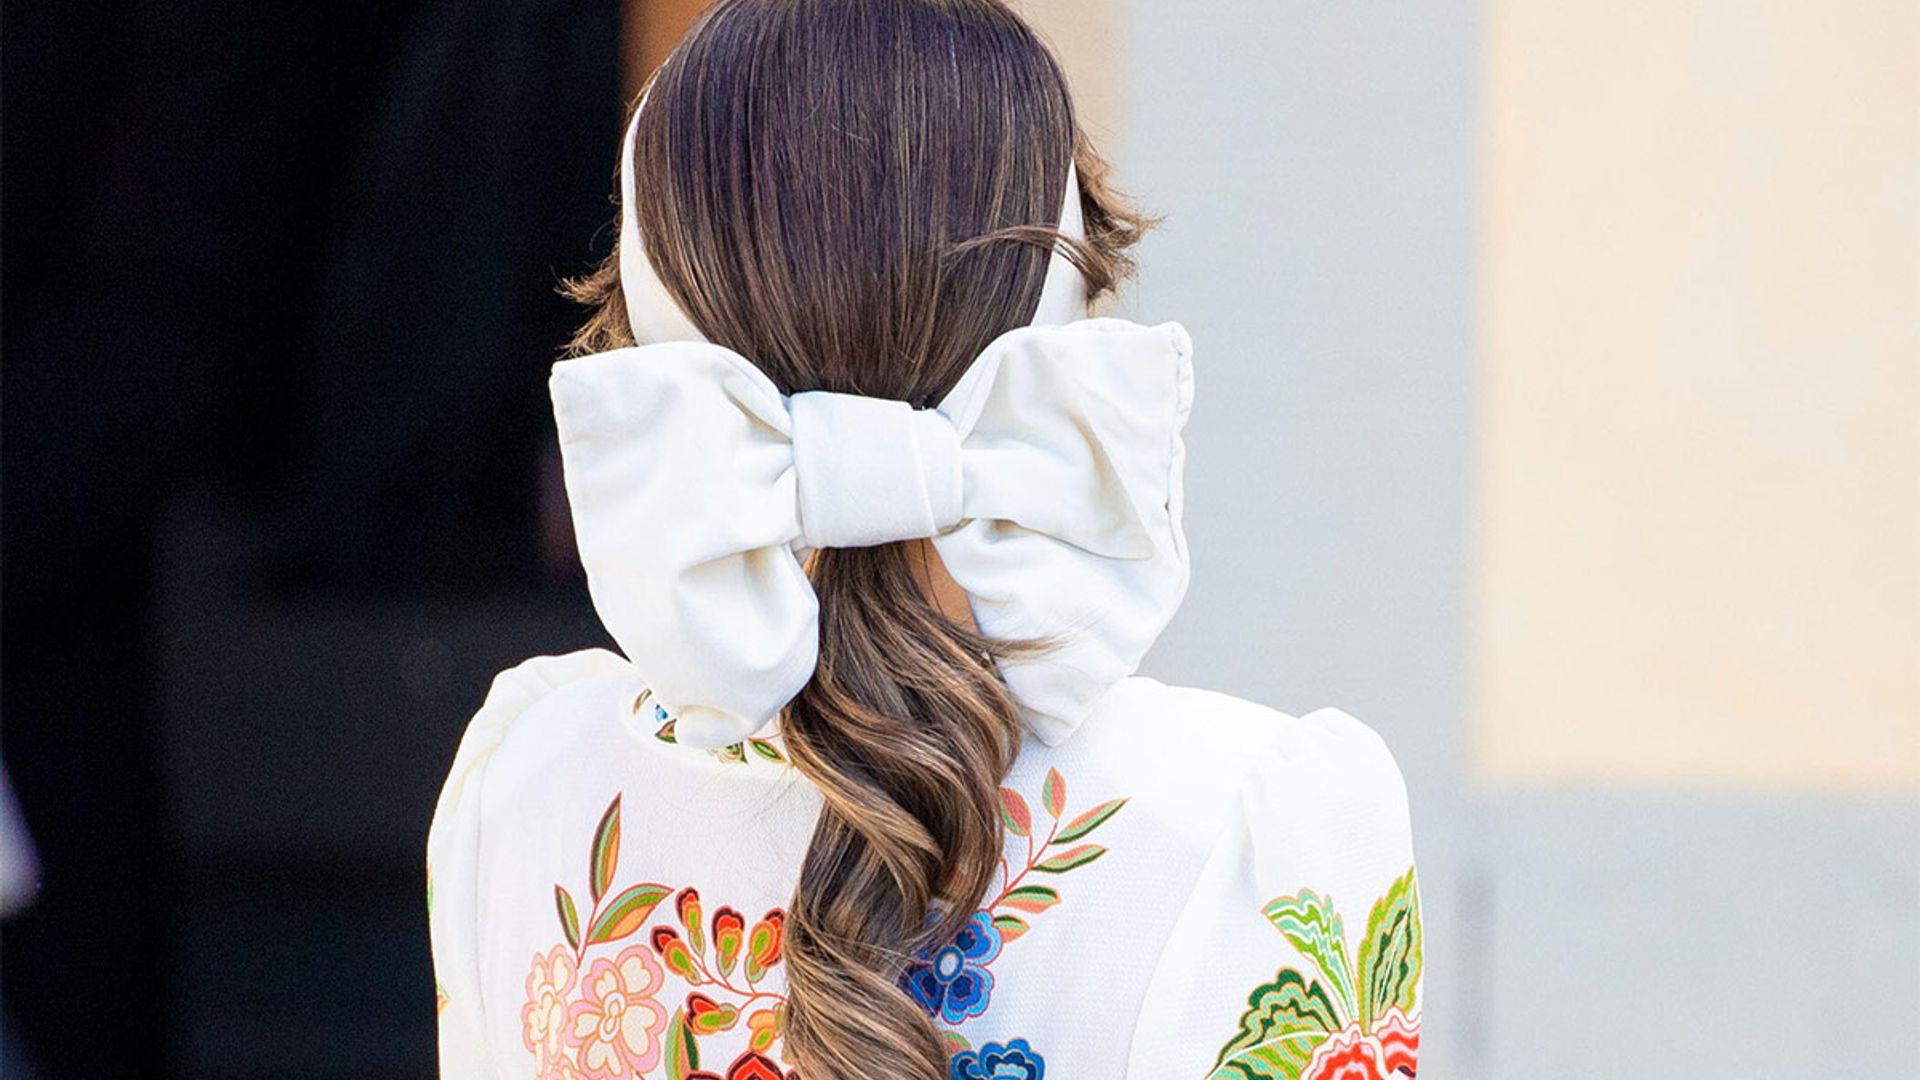 Princess Sofia of Sweden debuts new look - but did you spot her Carrie Bradshaw shoes?